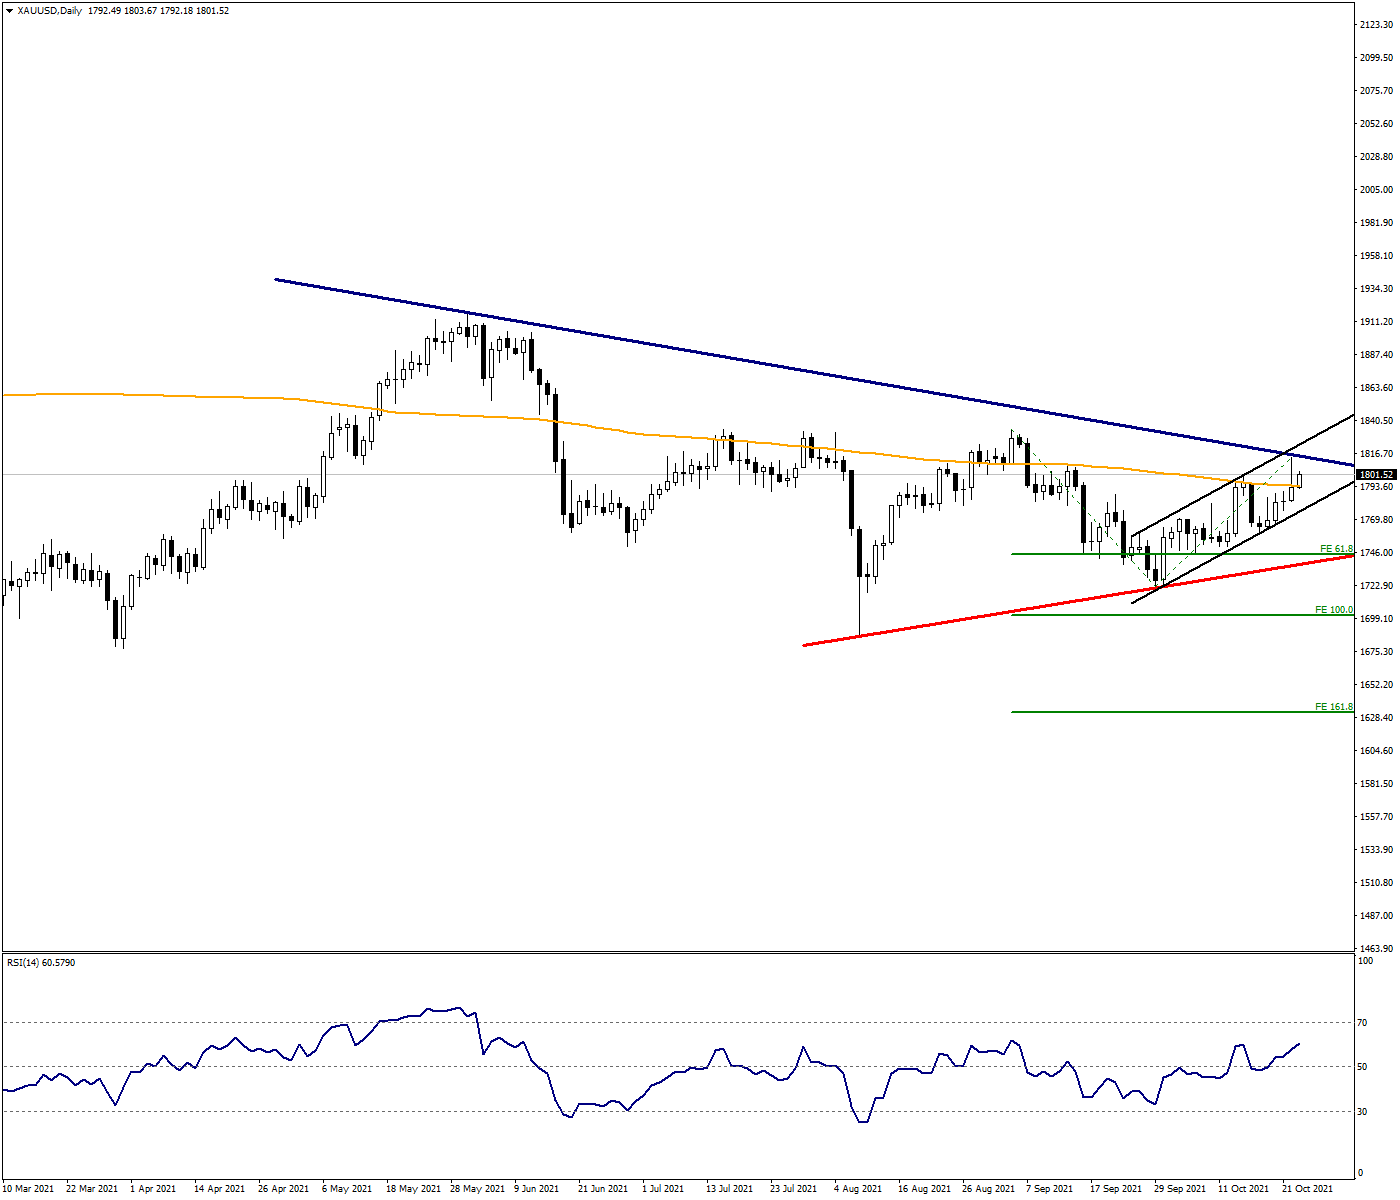 XAUUSD stays above 1812 resistance